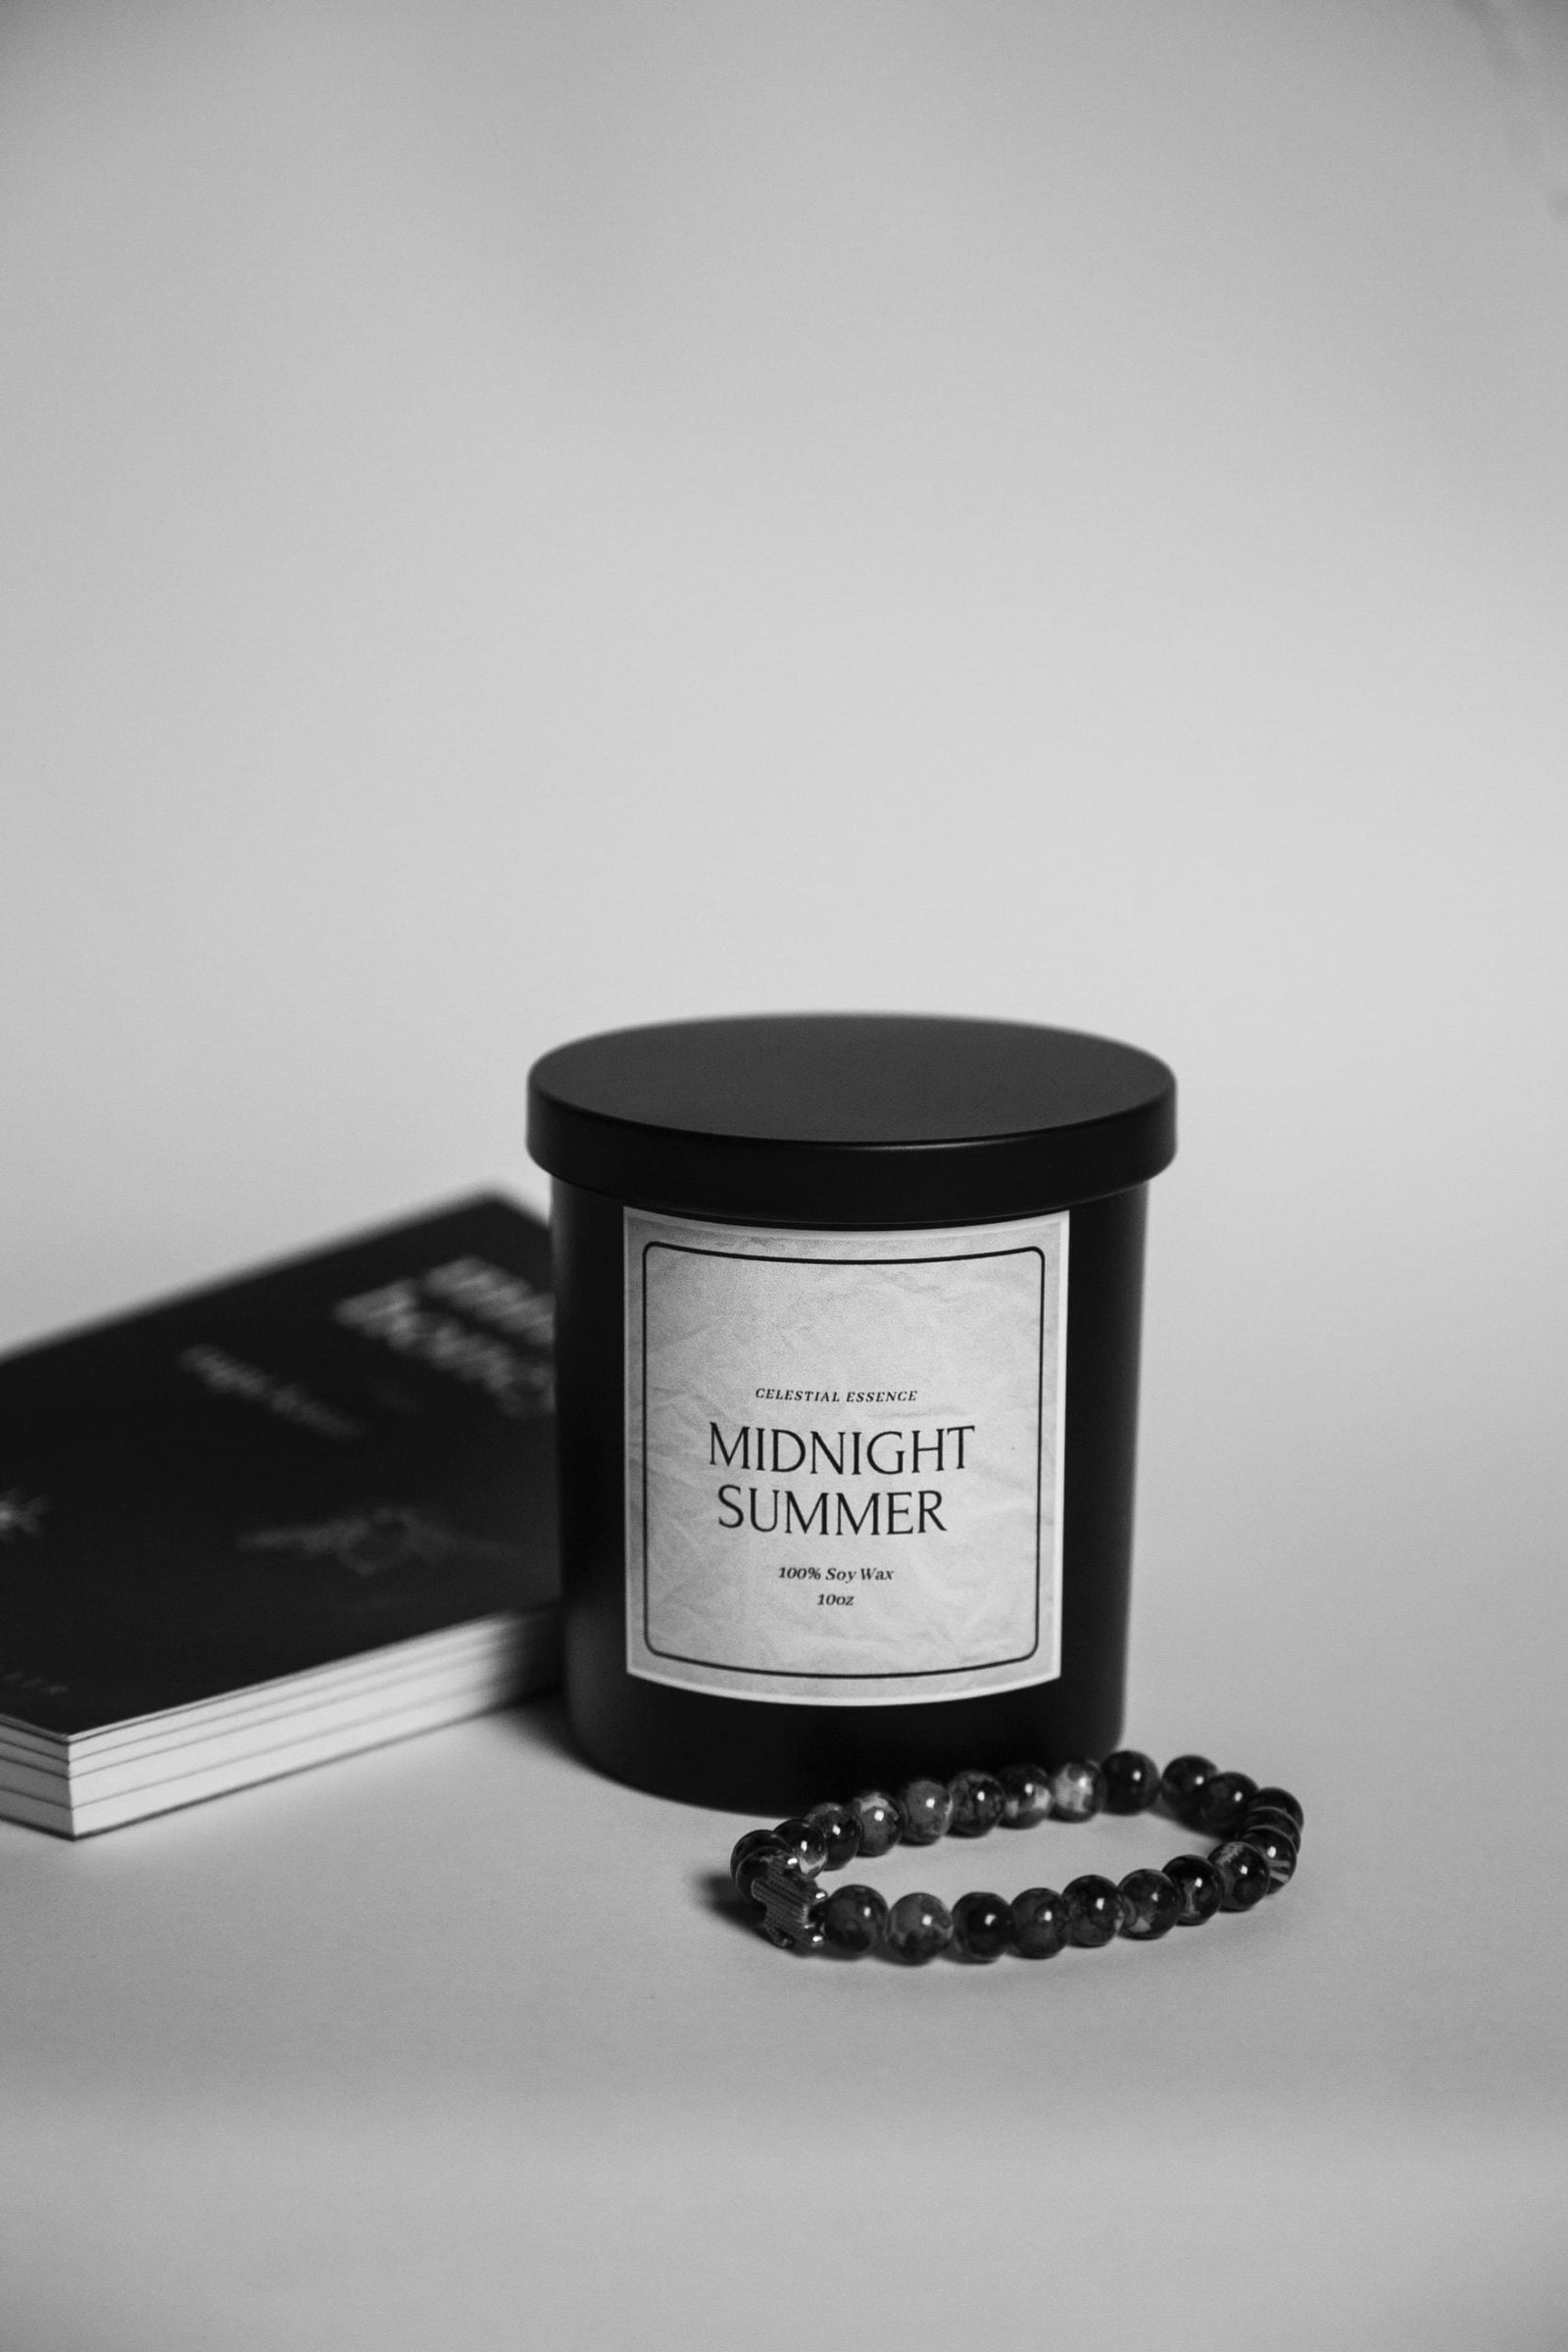 Celestial Essence Midnight Summer Candle